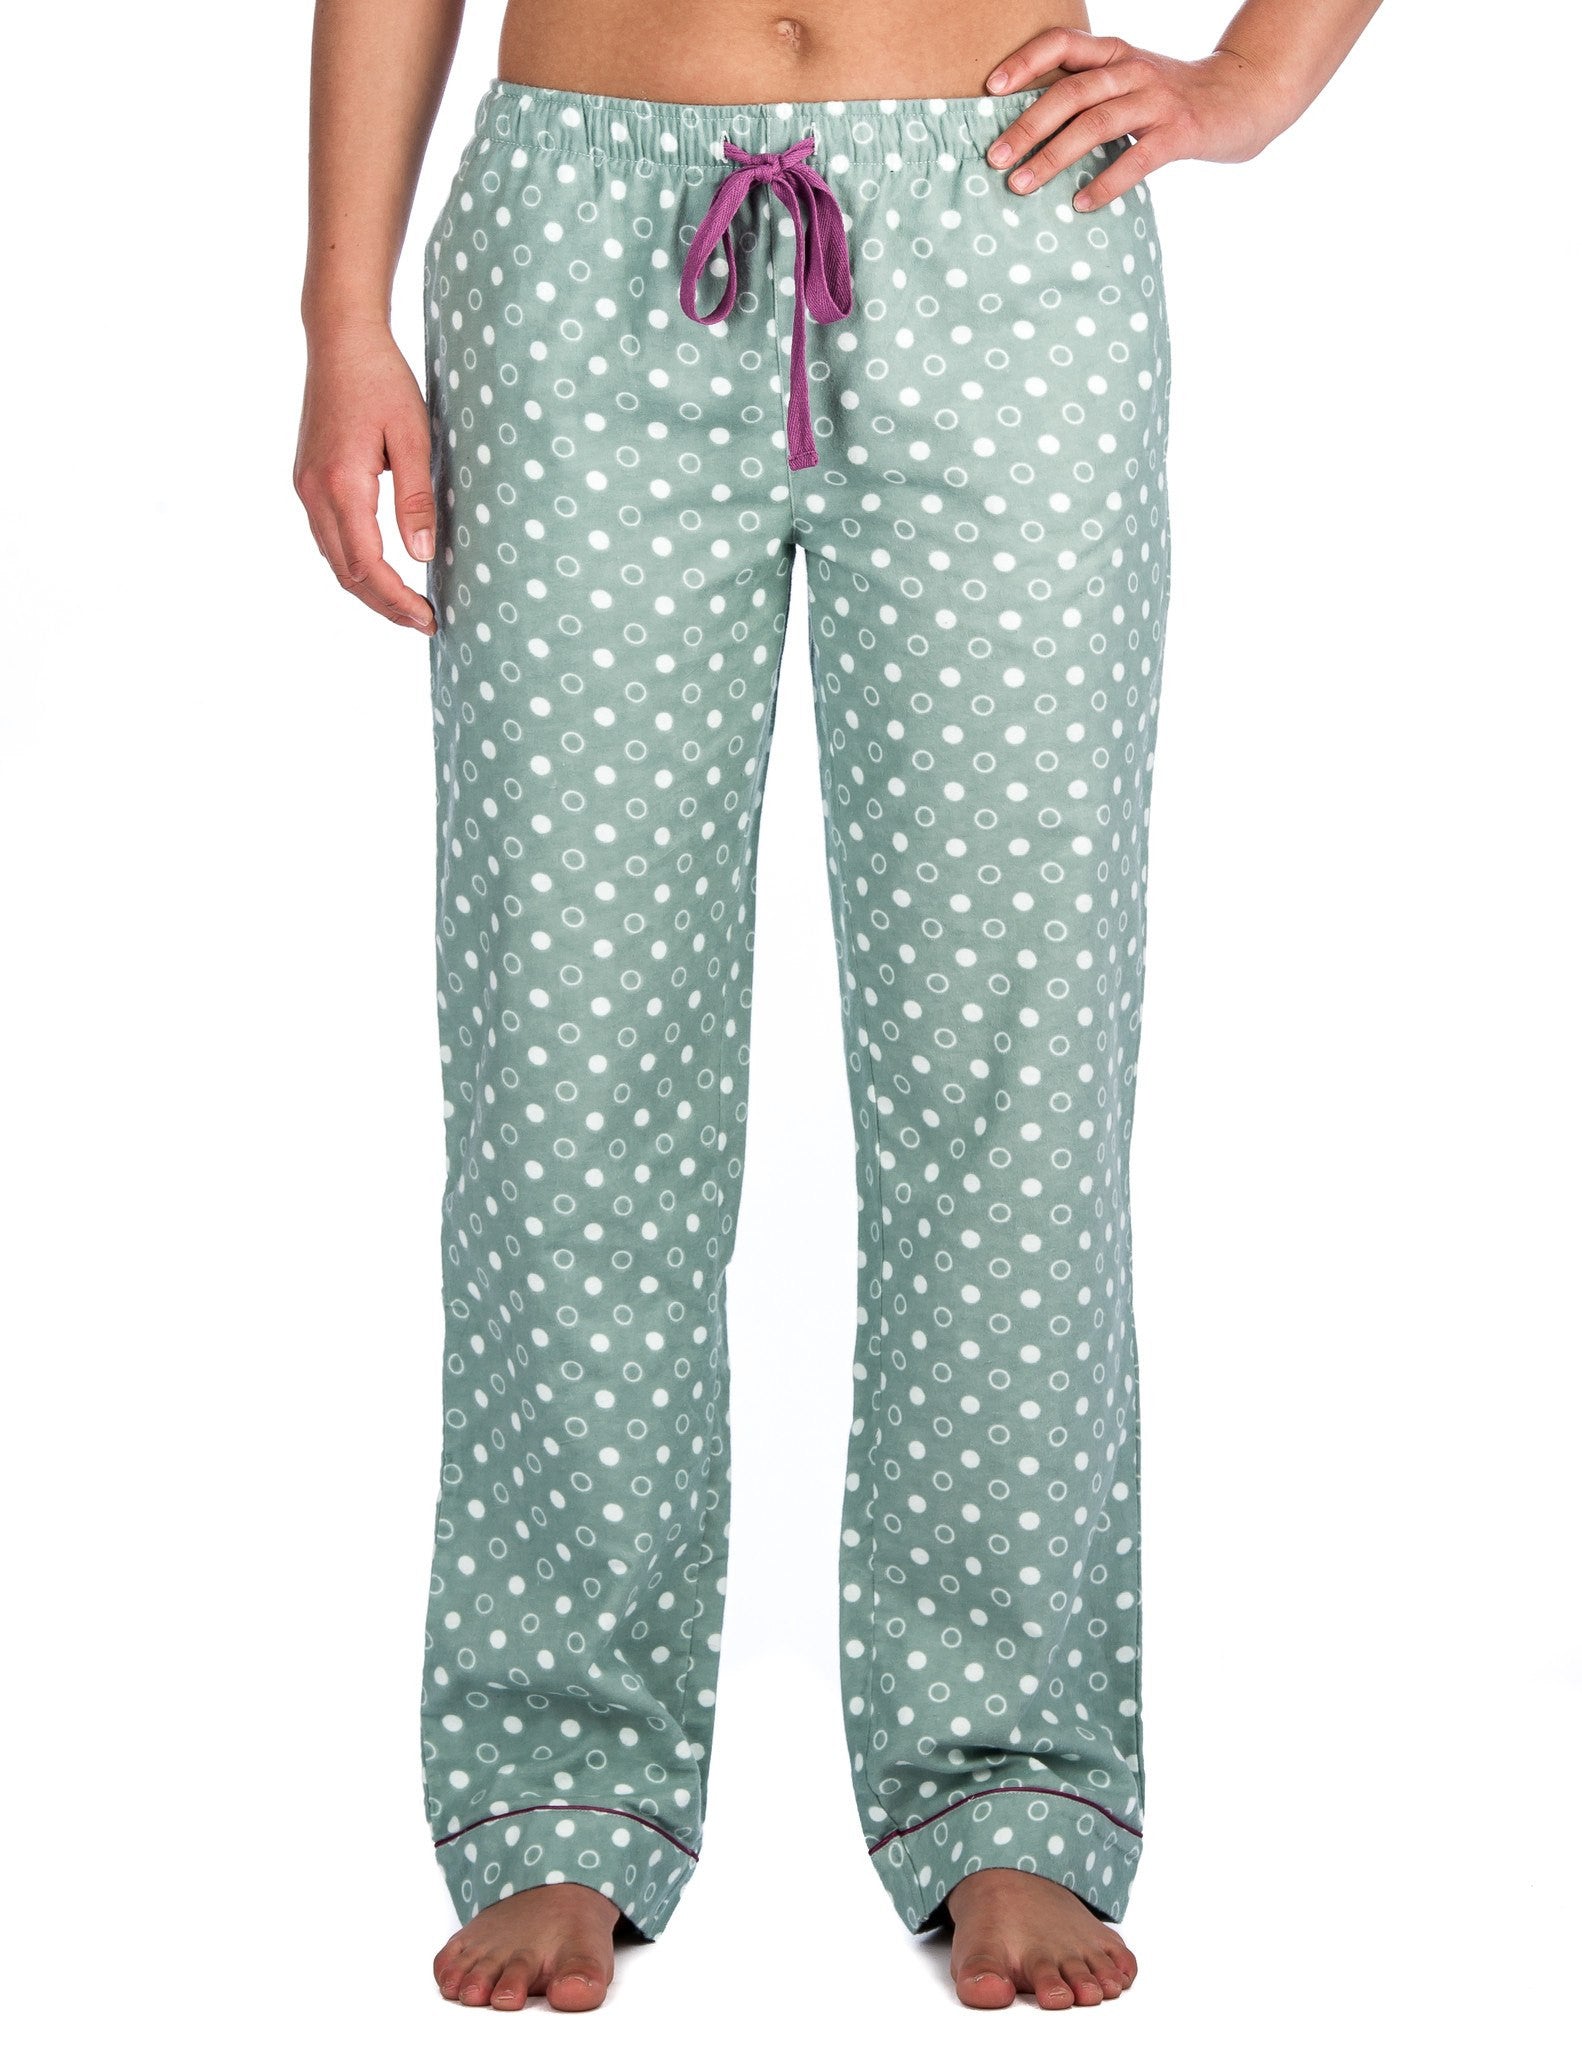 Womens 100% Cotton Flannel Lounge Pants - Relaxed Fit